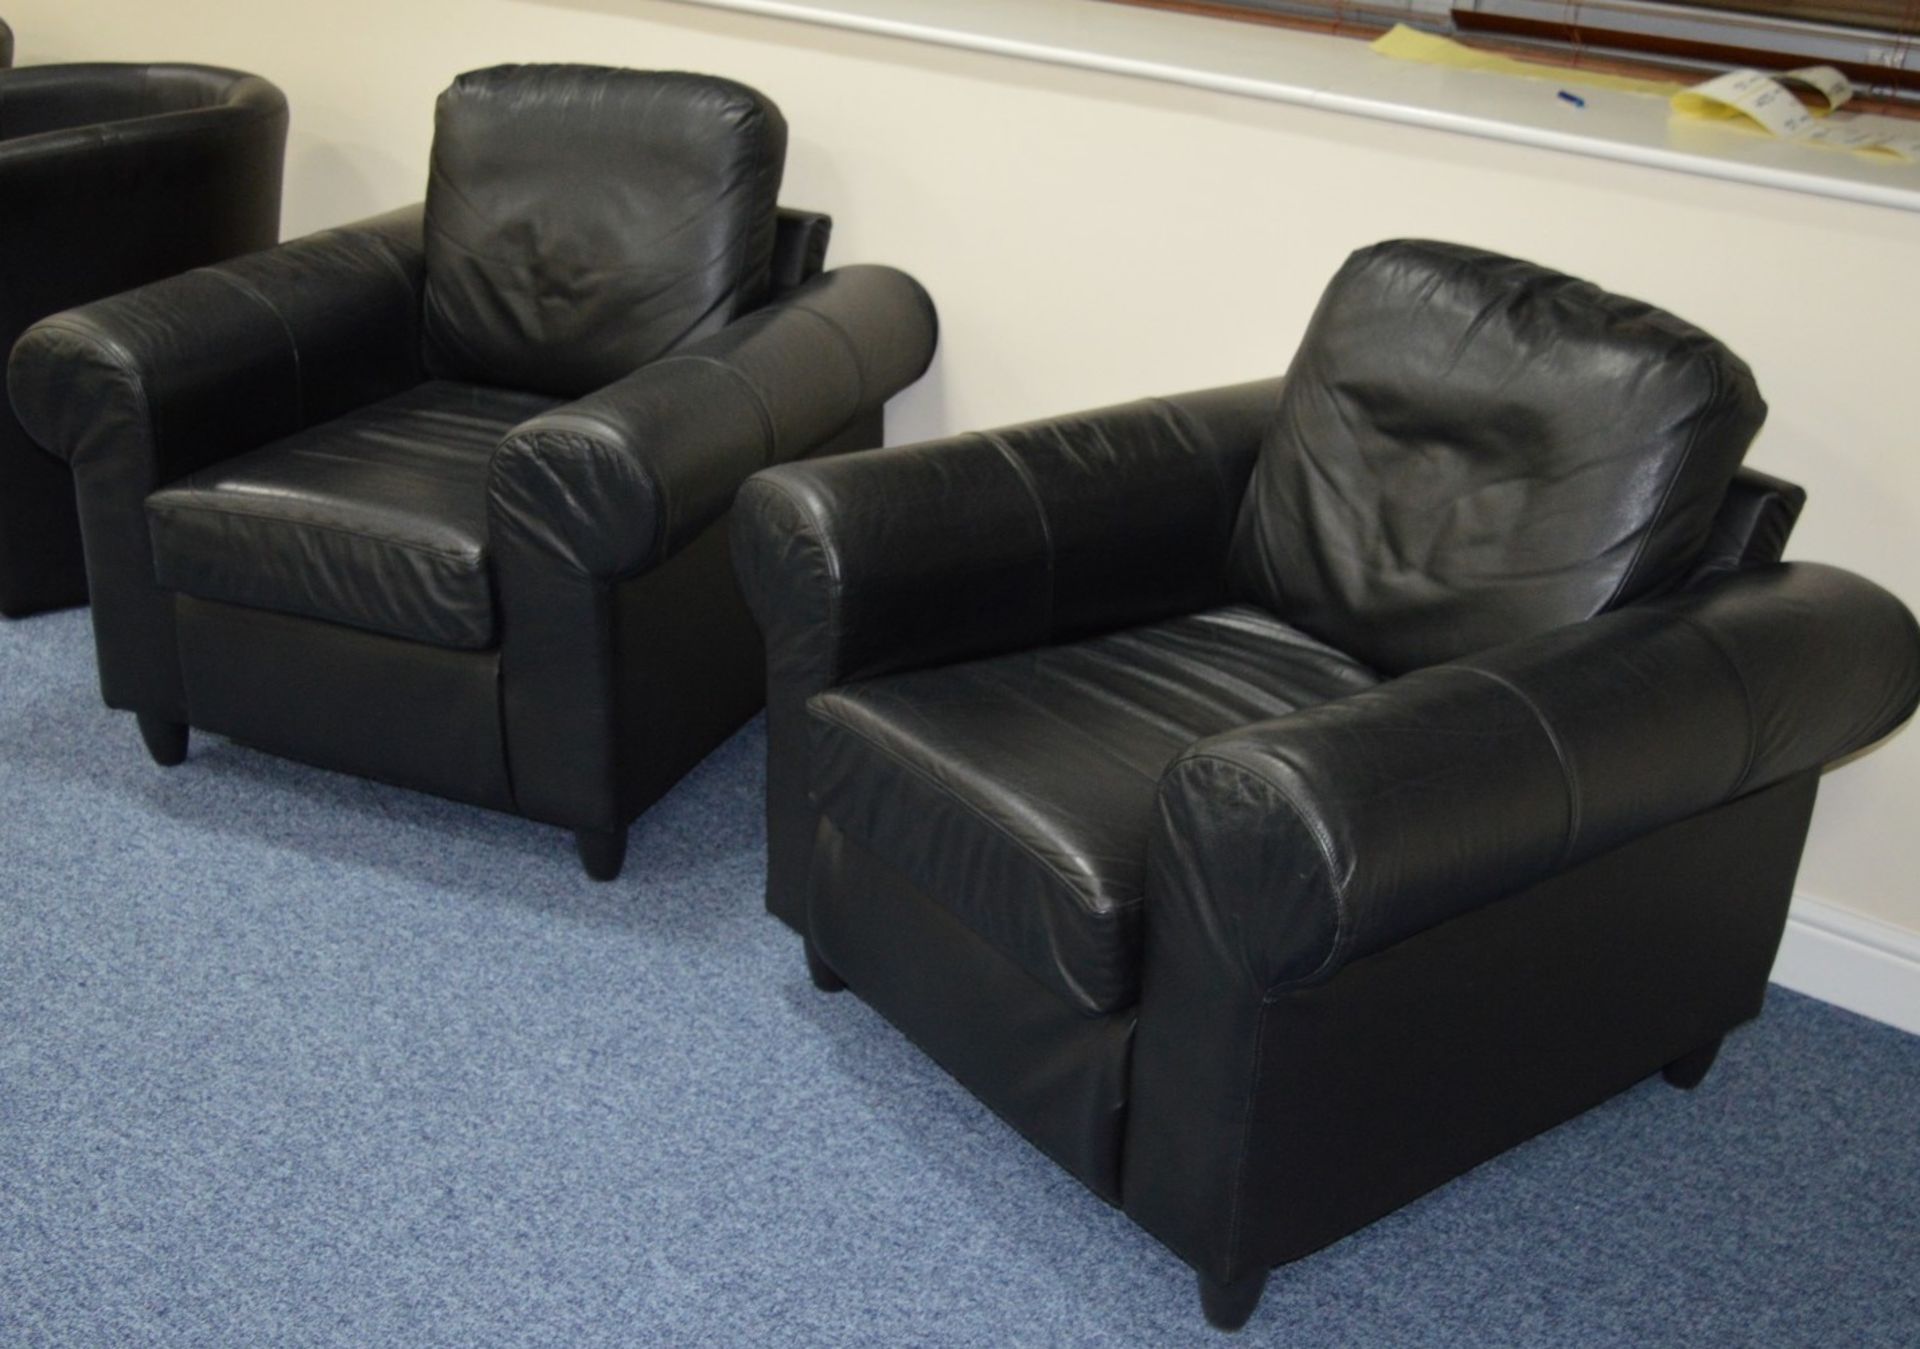 2 x Black Leather Armchairs - Contemporary Voluptuous Chairs in Black Leather - H85 x W94 x D86 - Image 4 of 5